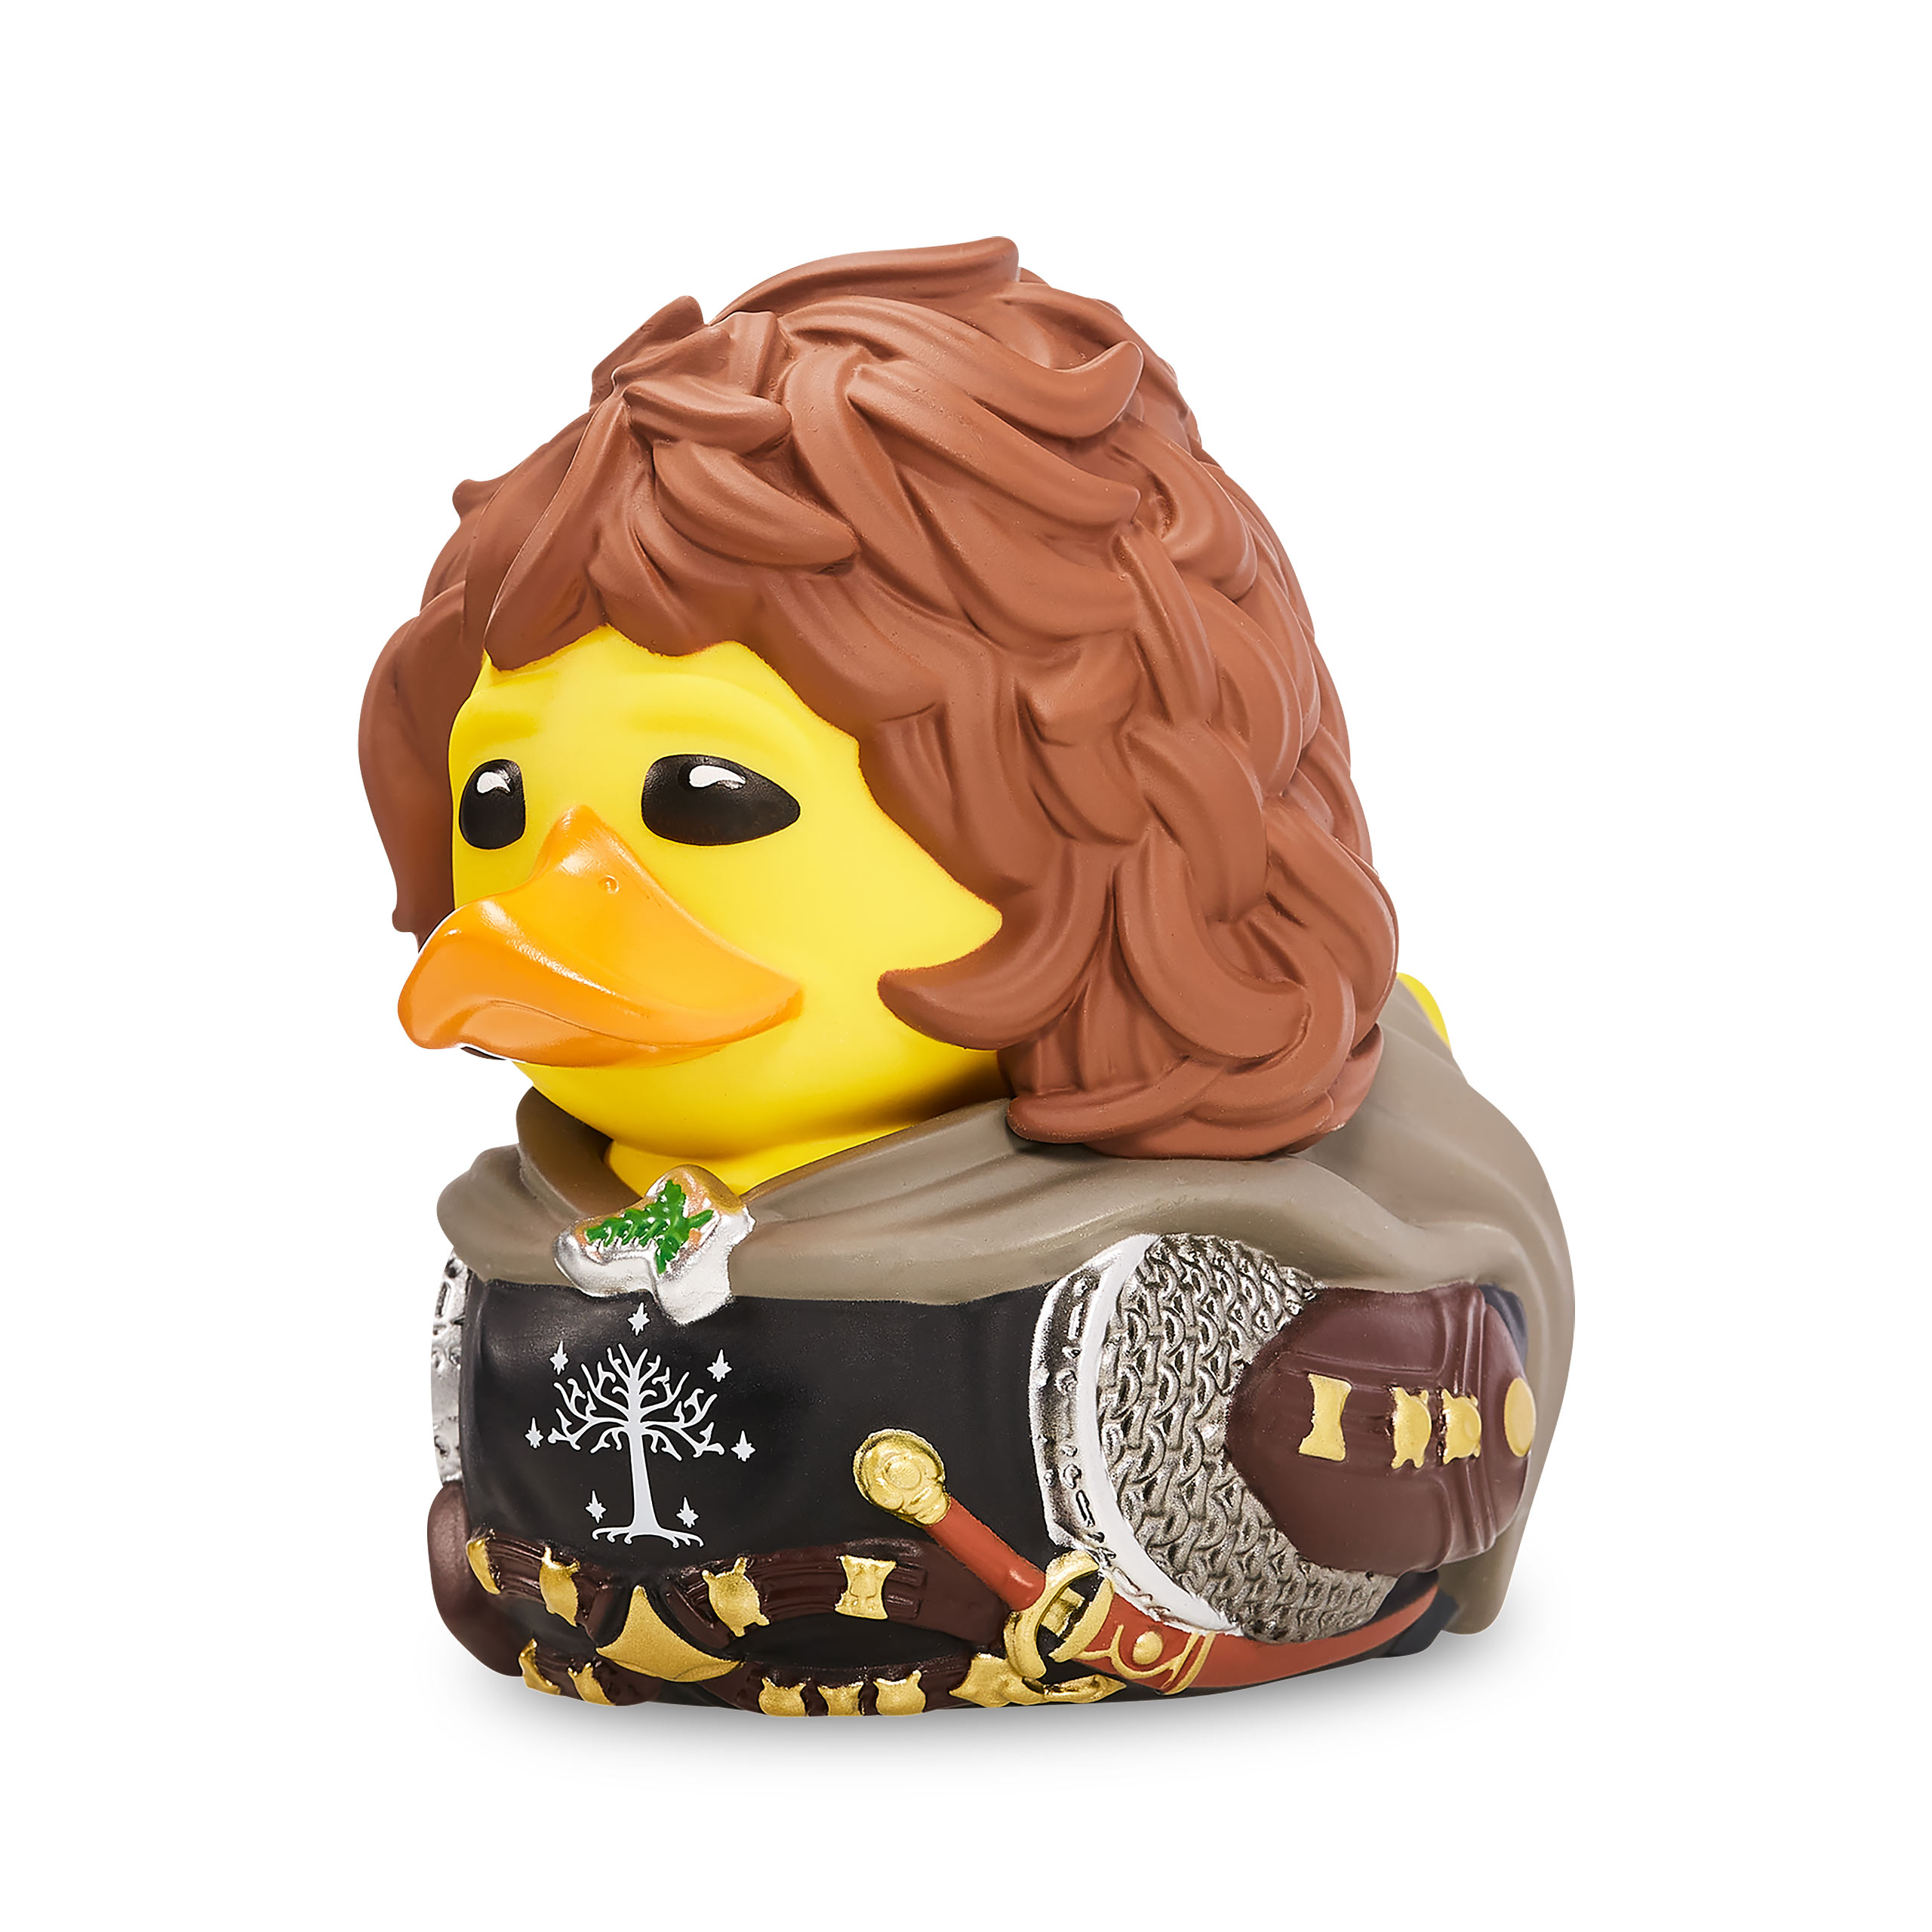 Lord of the Rings - Pippin Took TUBBZ Decorative Duck